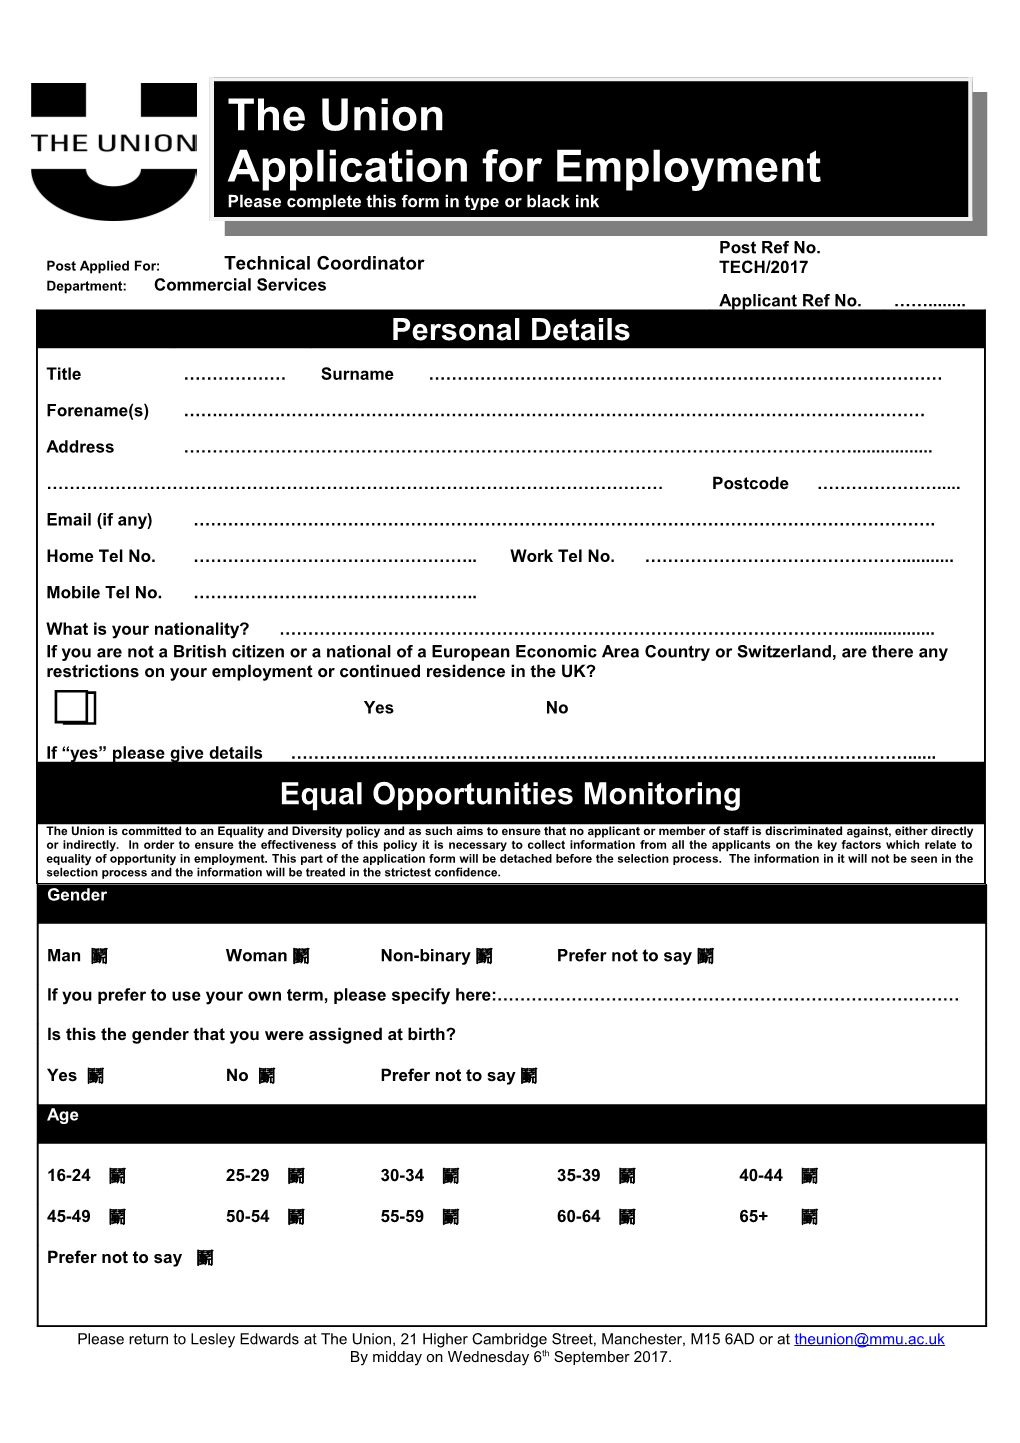 Please Complete This Form in Type Or Black Ink